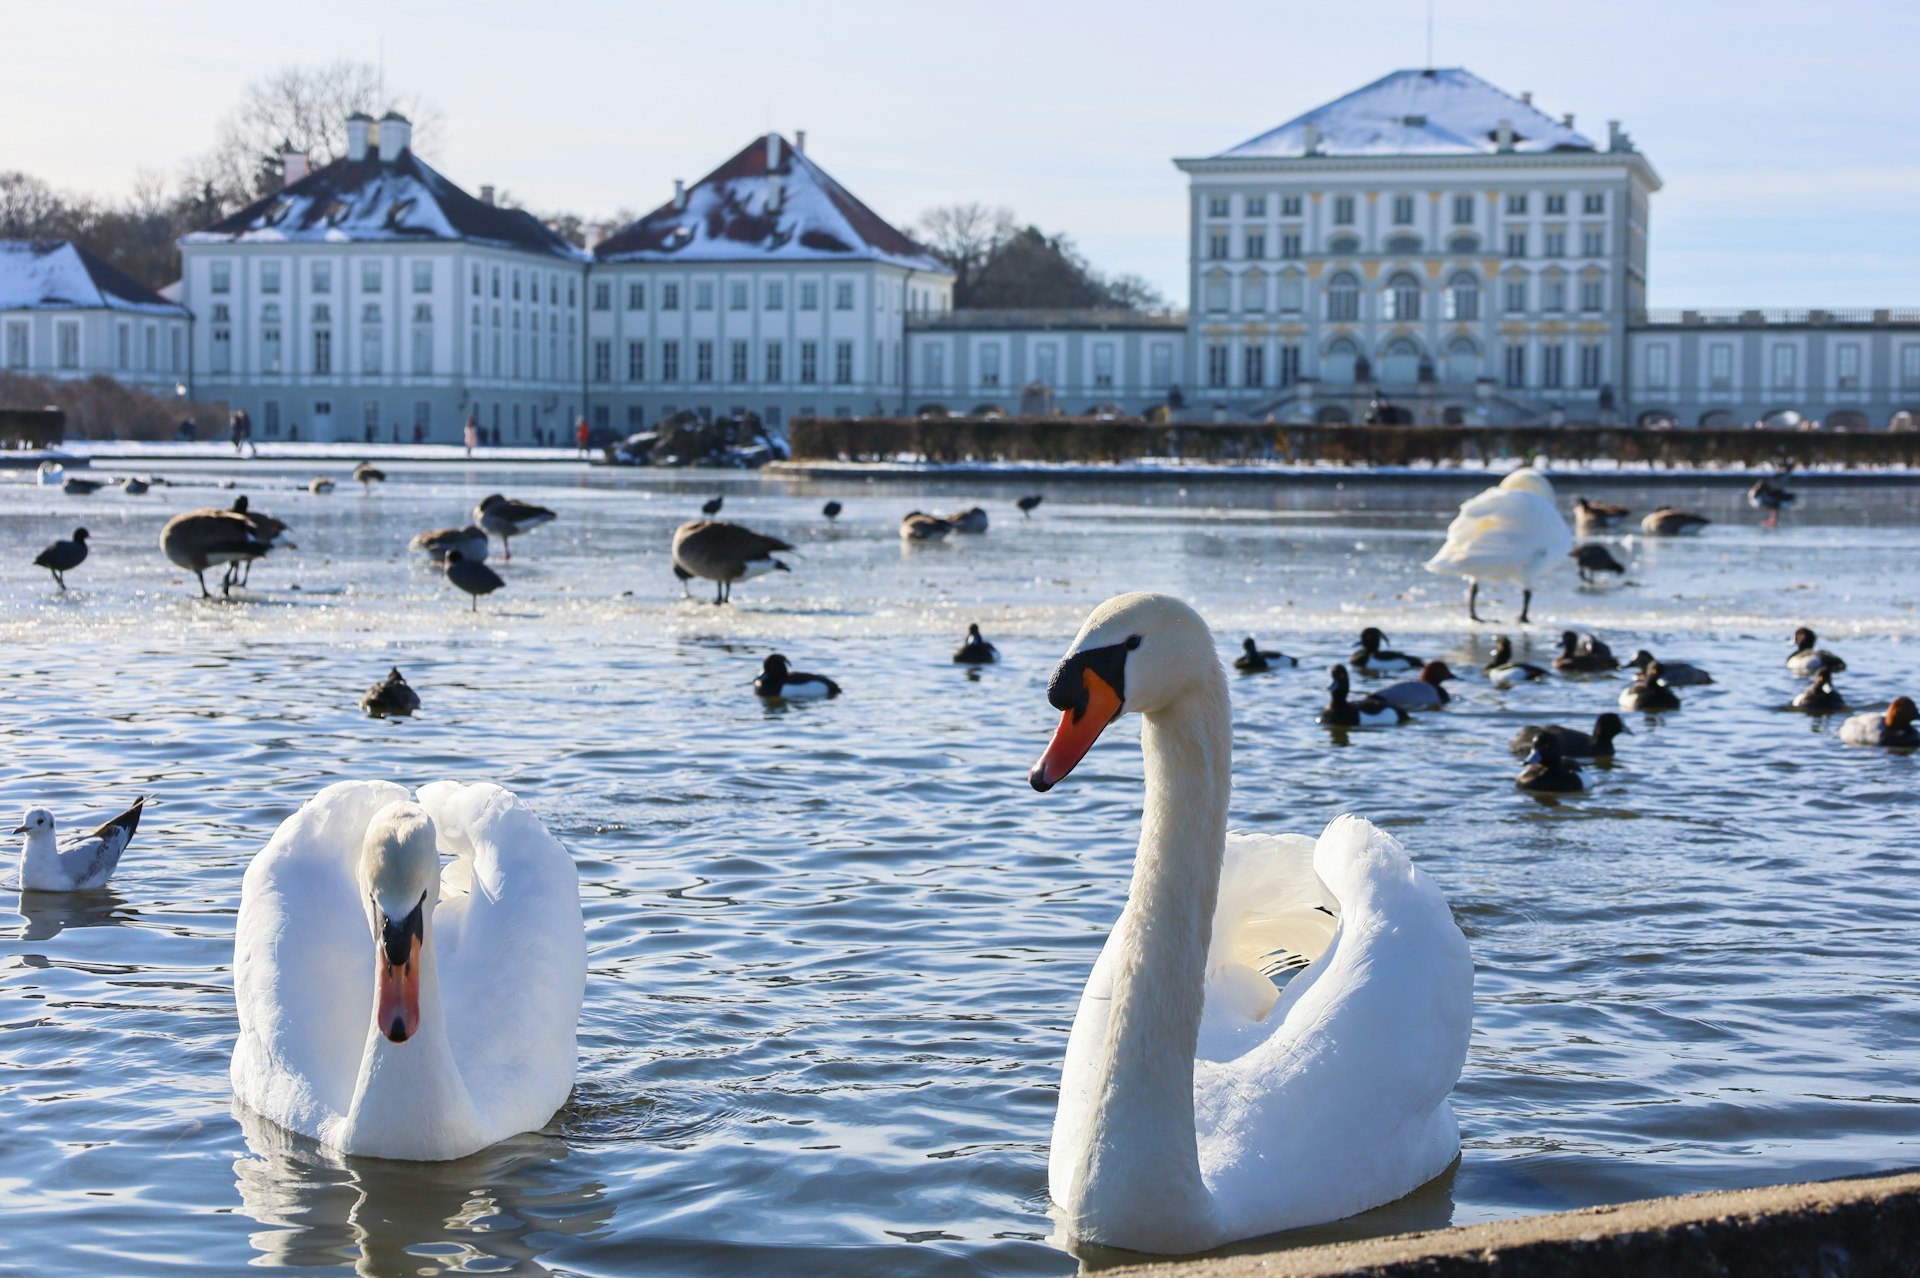 Swans in the pond in front of Nymphenburg Castle, Munich, Bavaria, Germany